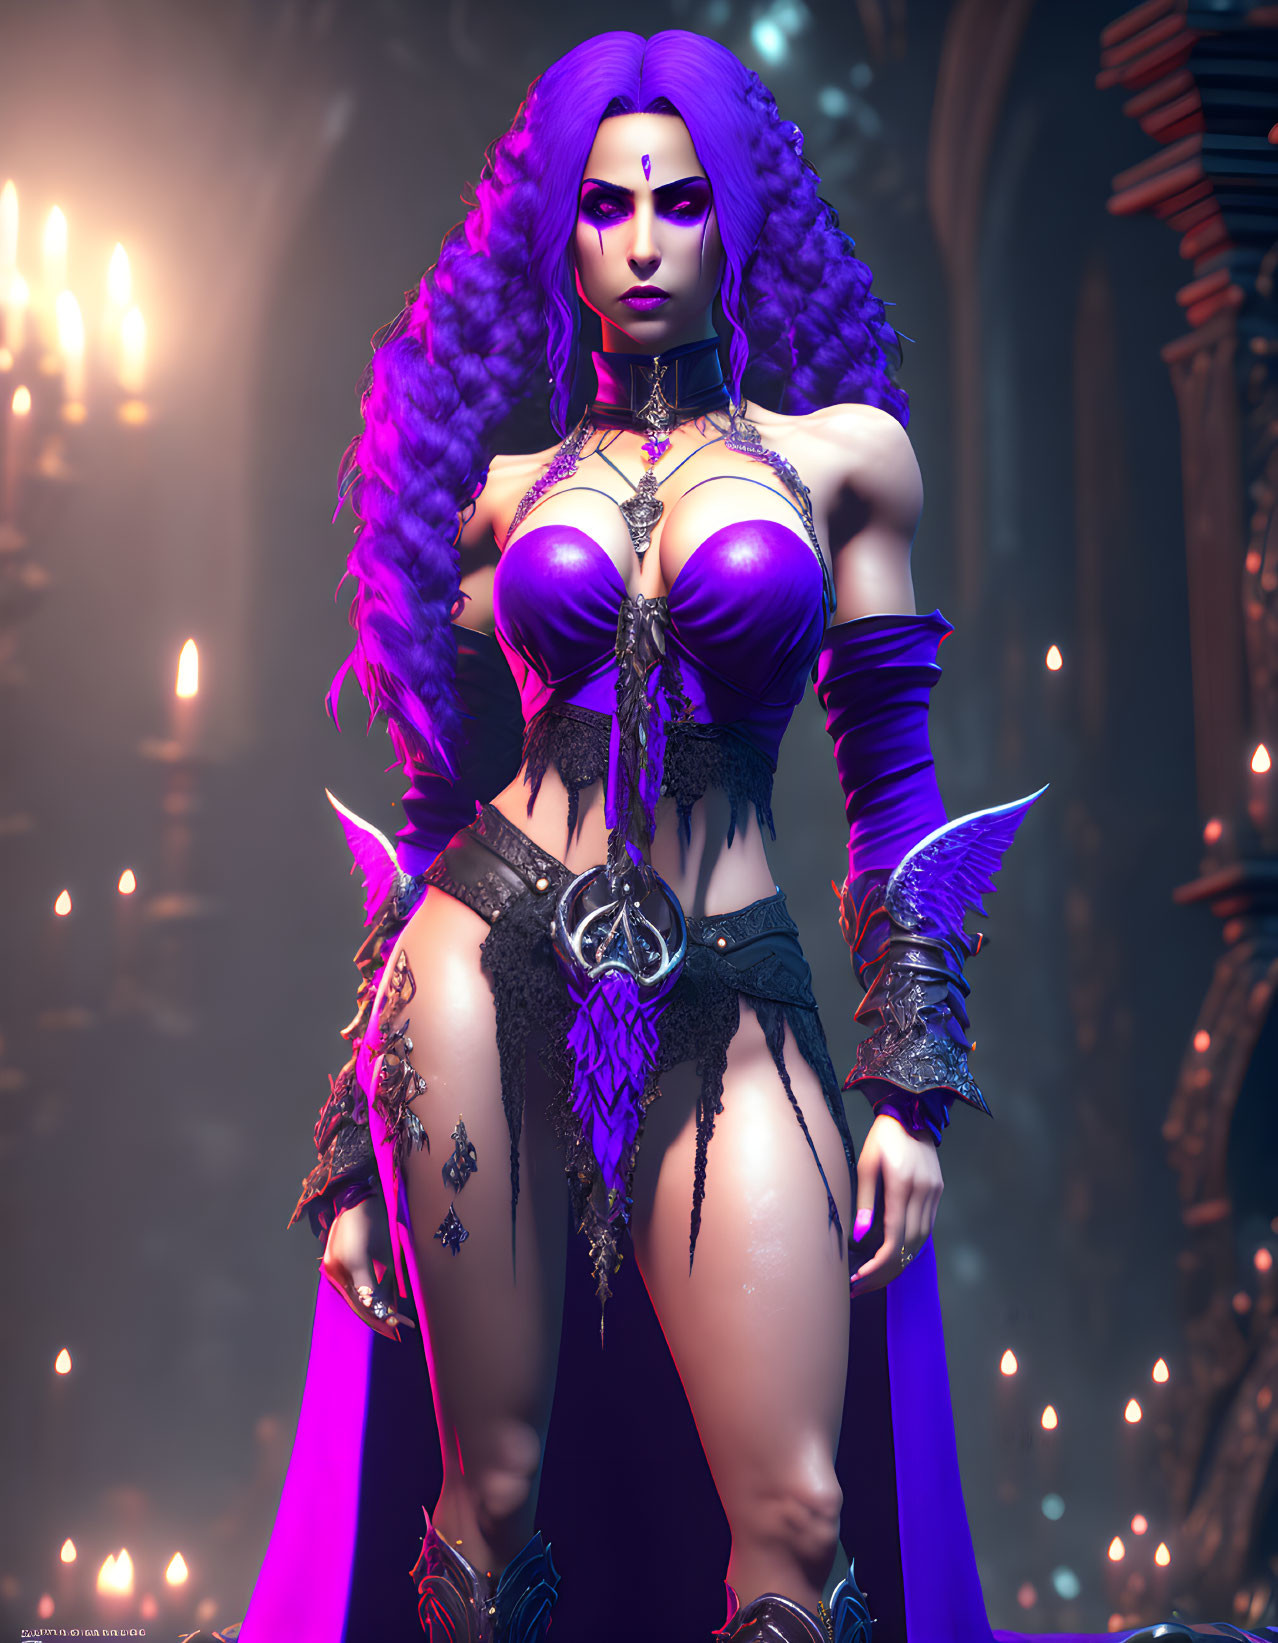 Fantasy 3D character in purple armor in gothic setting